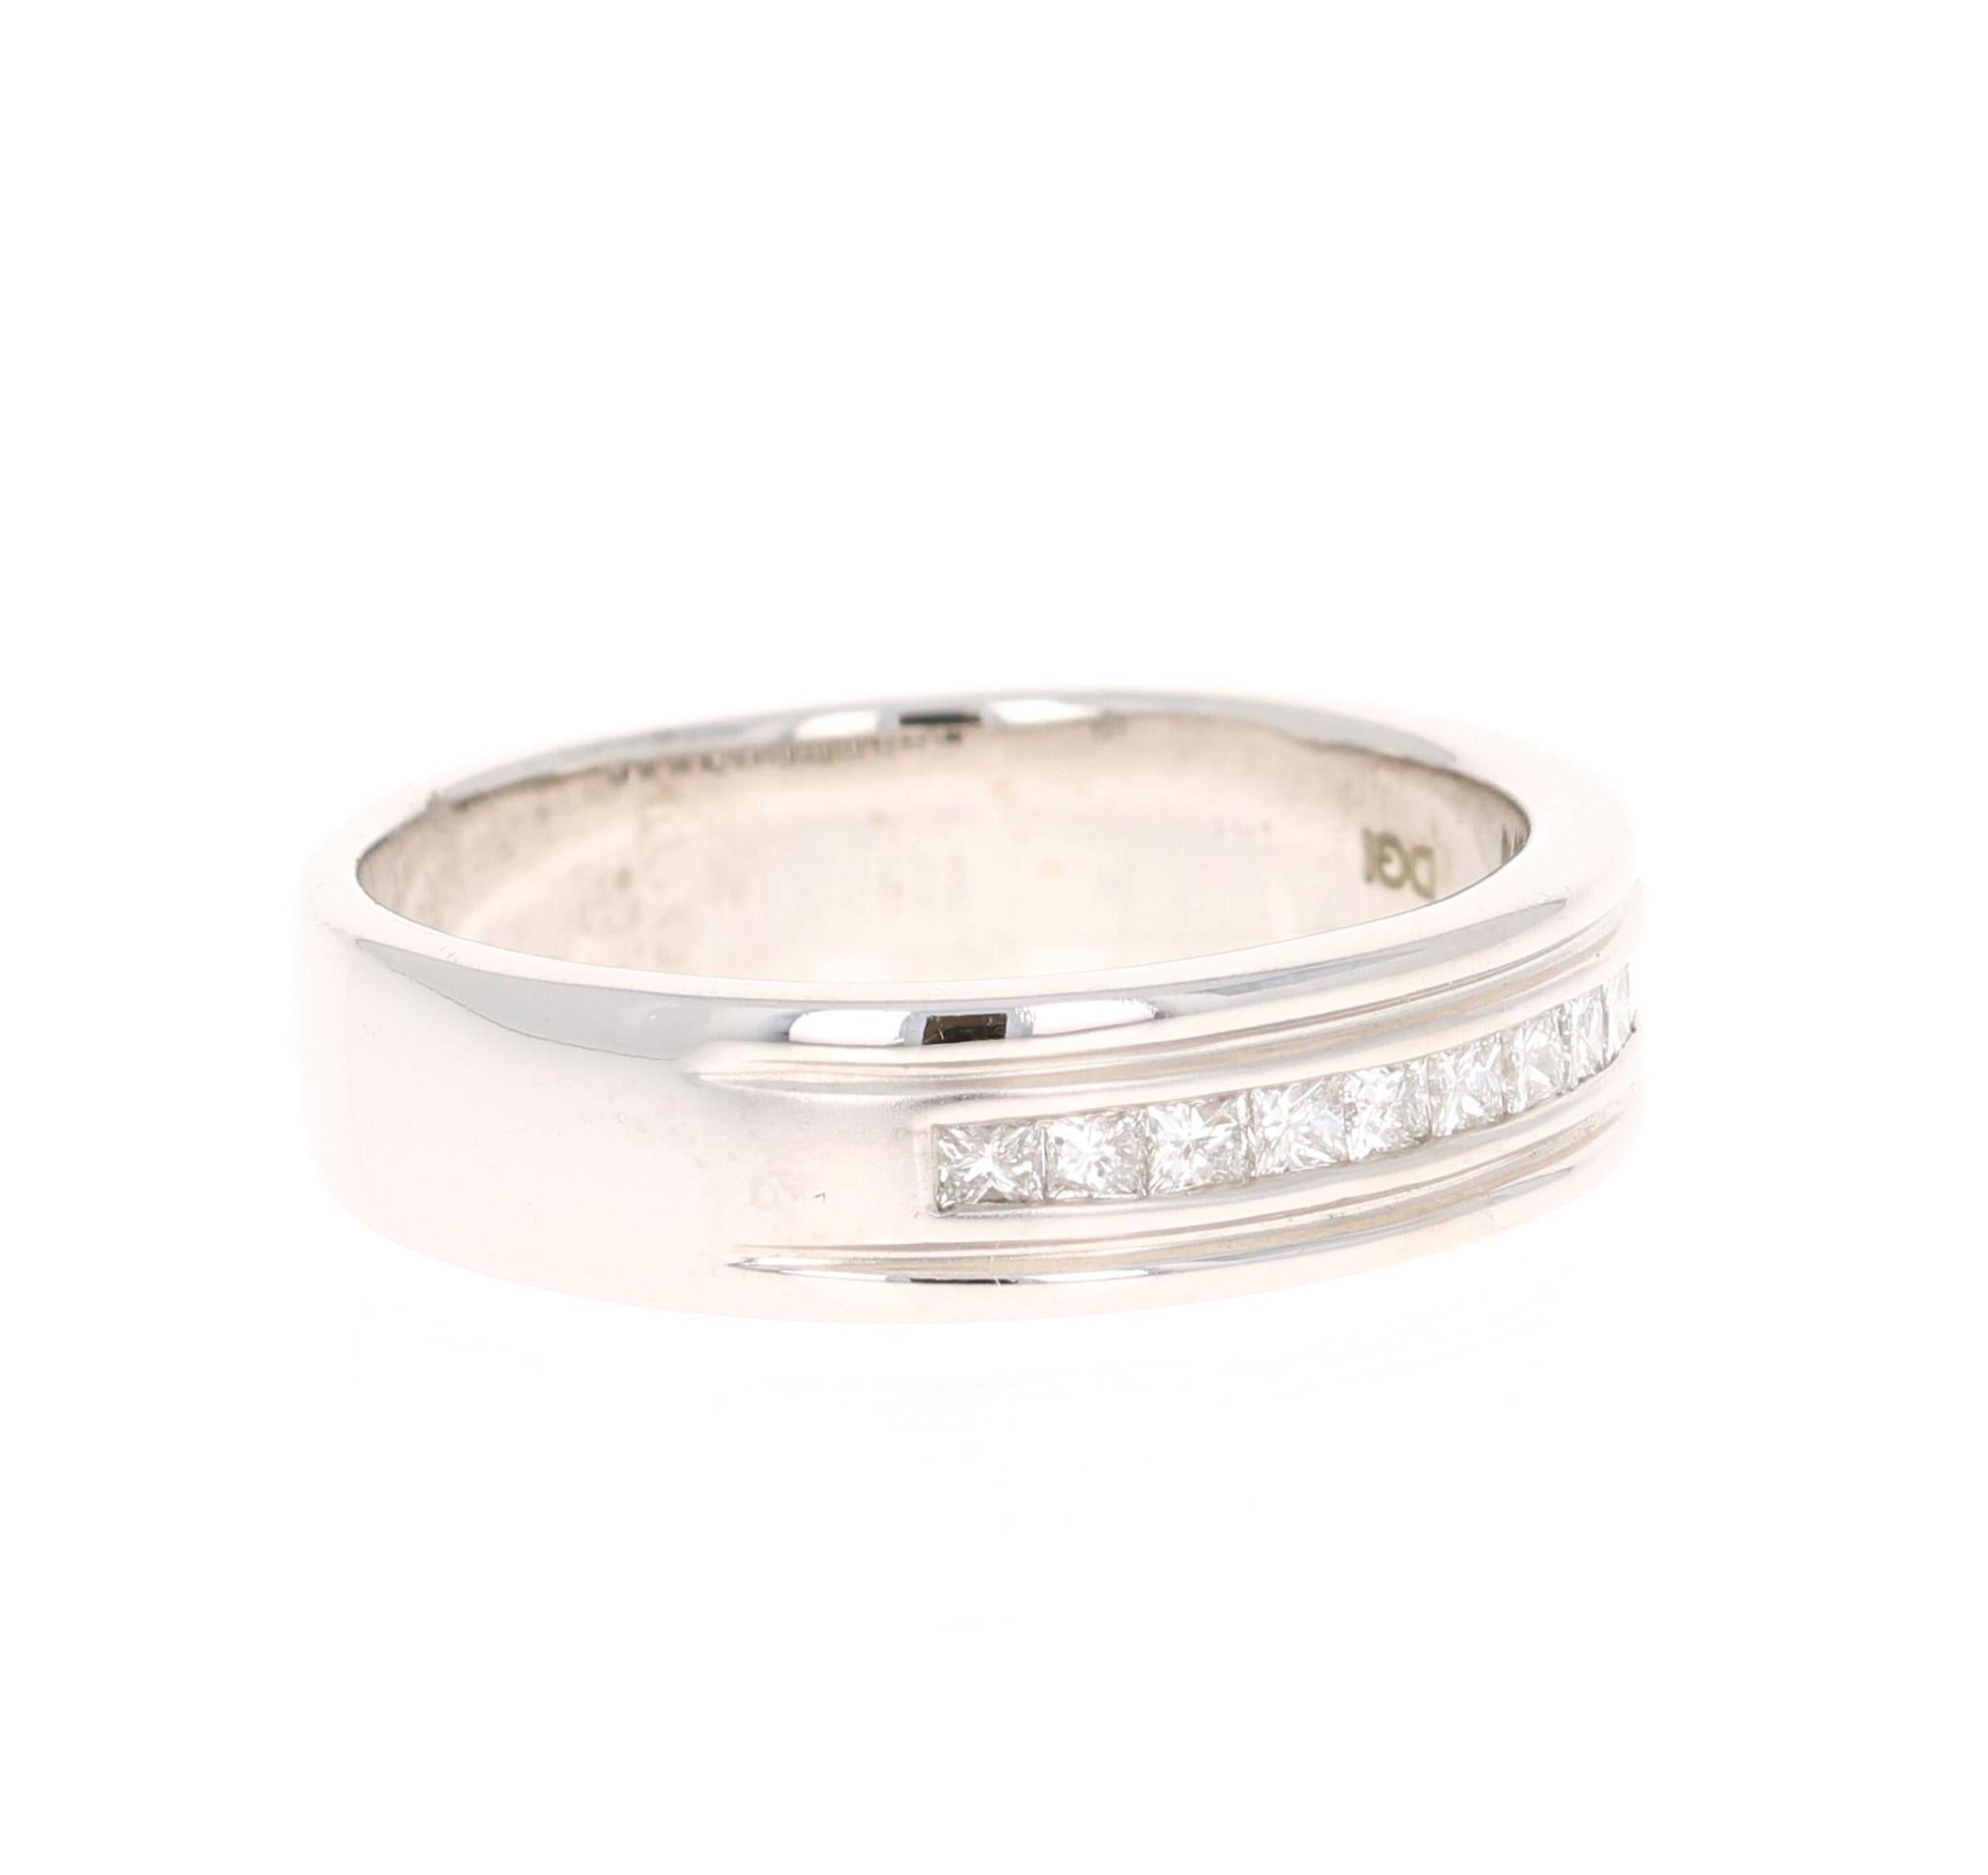 This Men's Band has 11 Princess Cut Diamonds that weigh 0.50 Carats.  The width of the band is 6 mm. 

It is crafted in 14 Karat White Gold and weighs approximately 7.4 grams. 

The ring is a size 10 and can be re-sized, free of charge.

